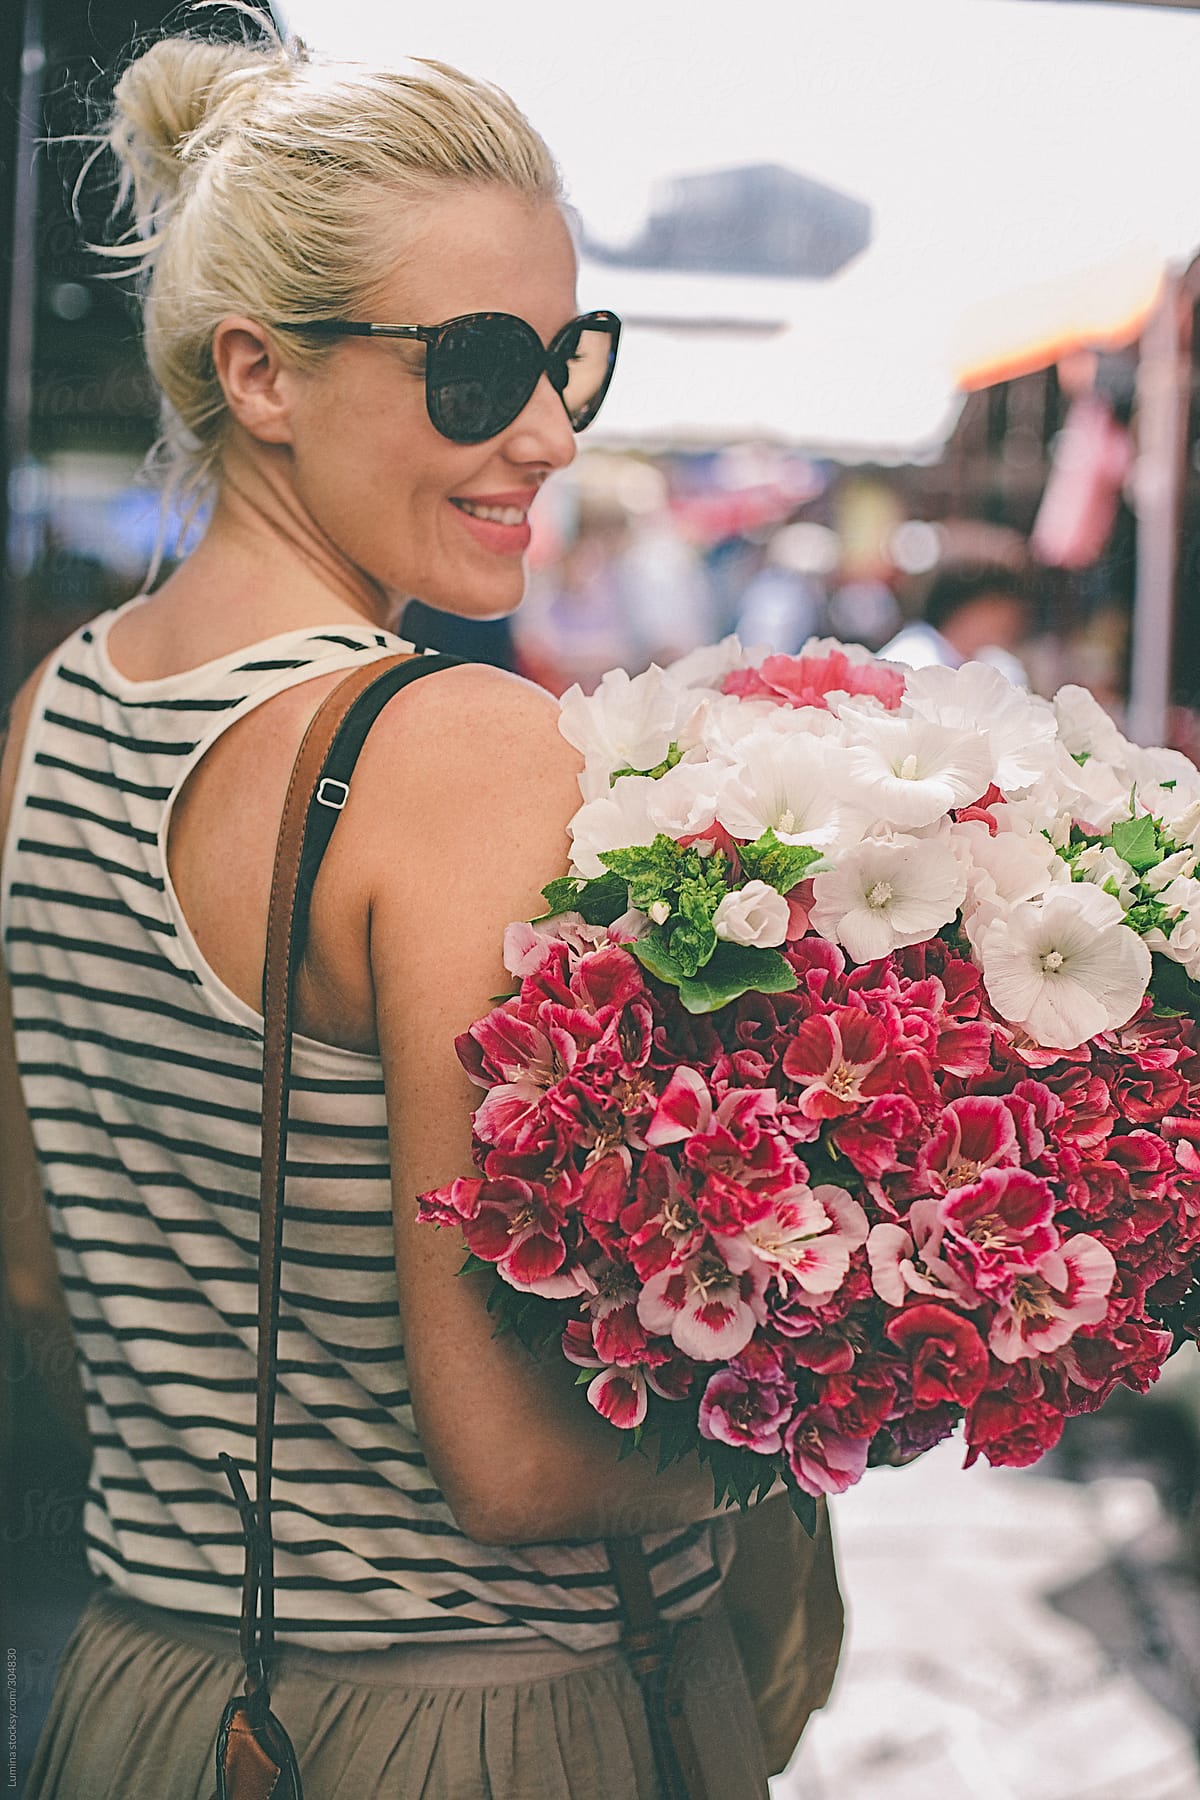 Smiling Woman Carrying Flowers